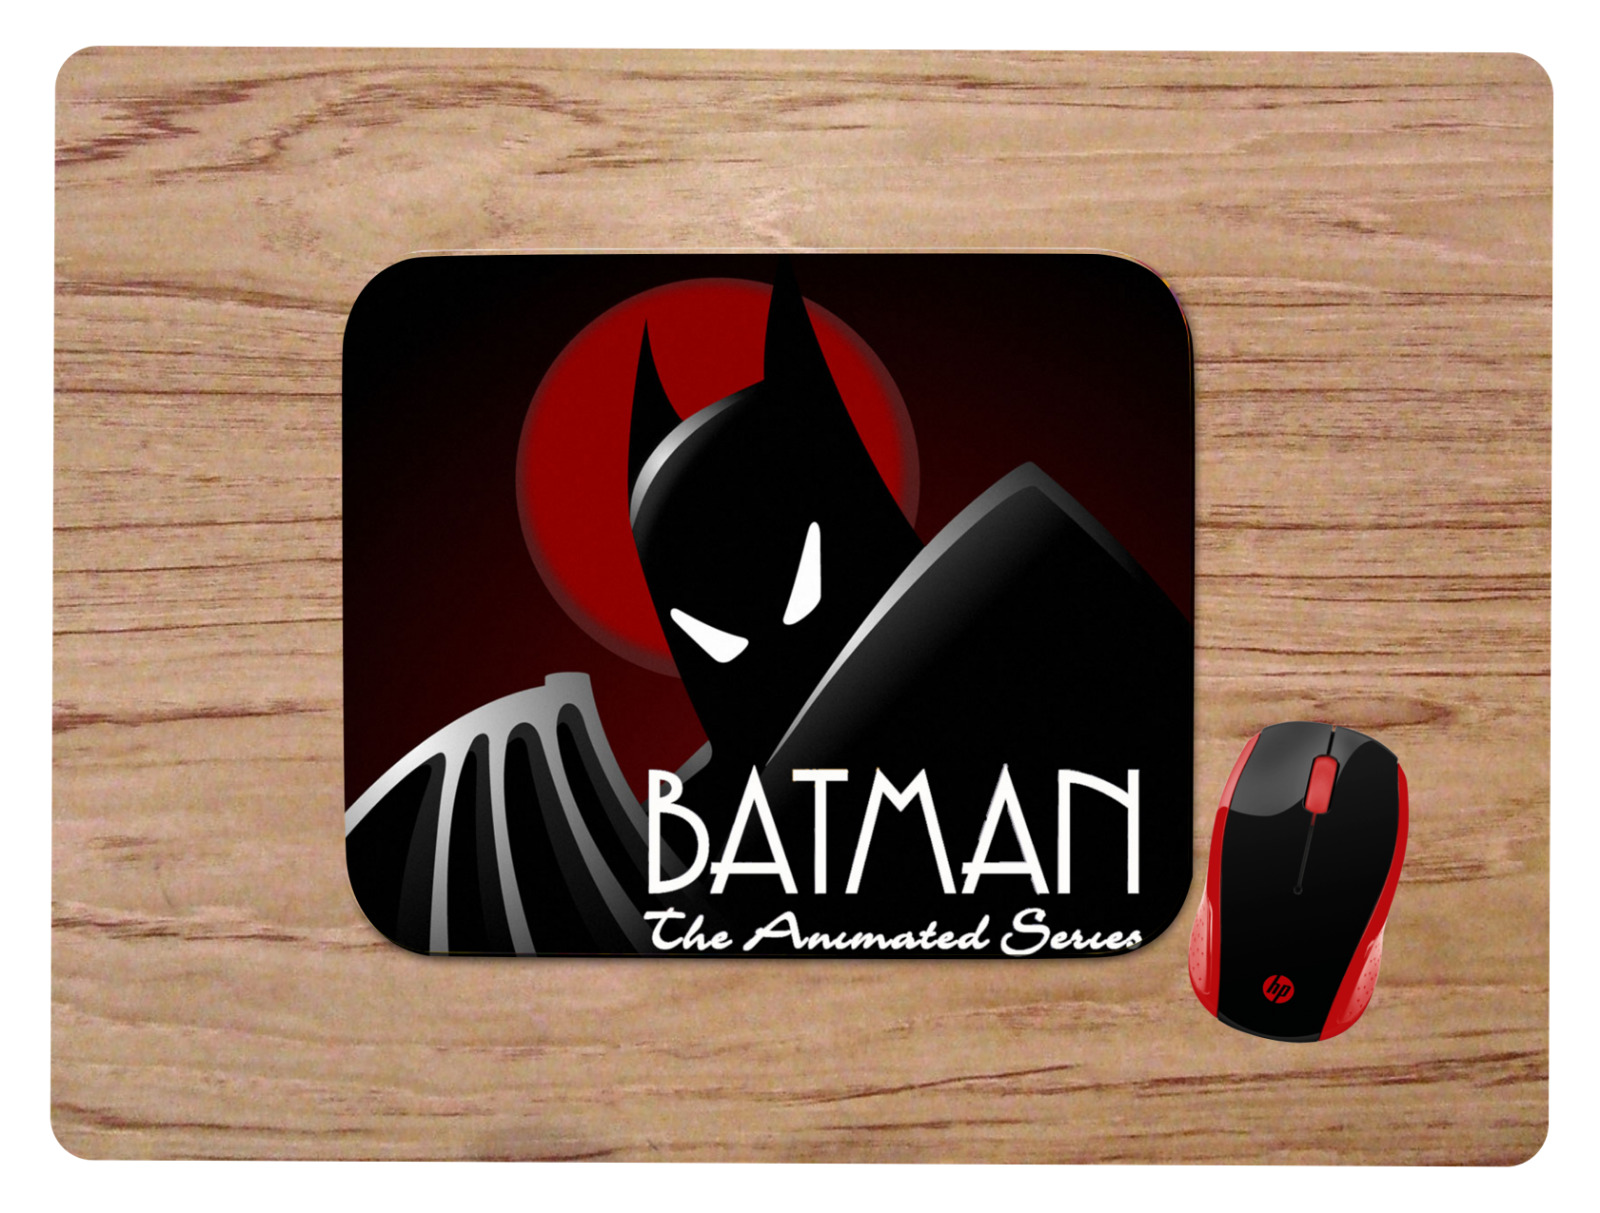 BATMAN THE ANIMATED SERIES DESIGN MOUSEPAD MOUSE PAD HOME SCHOOL OFFICE GIFT 